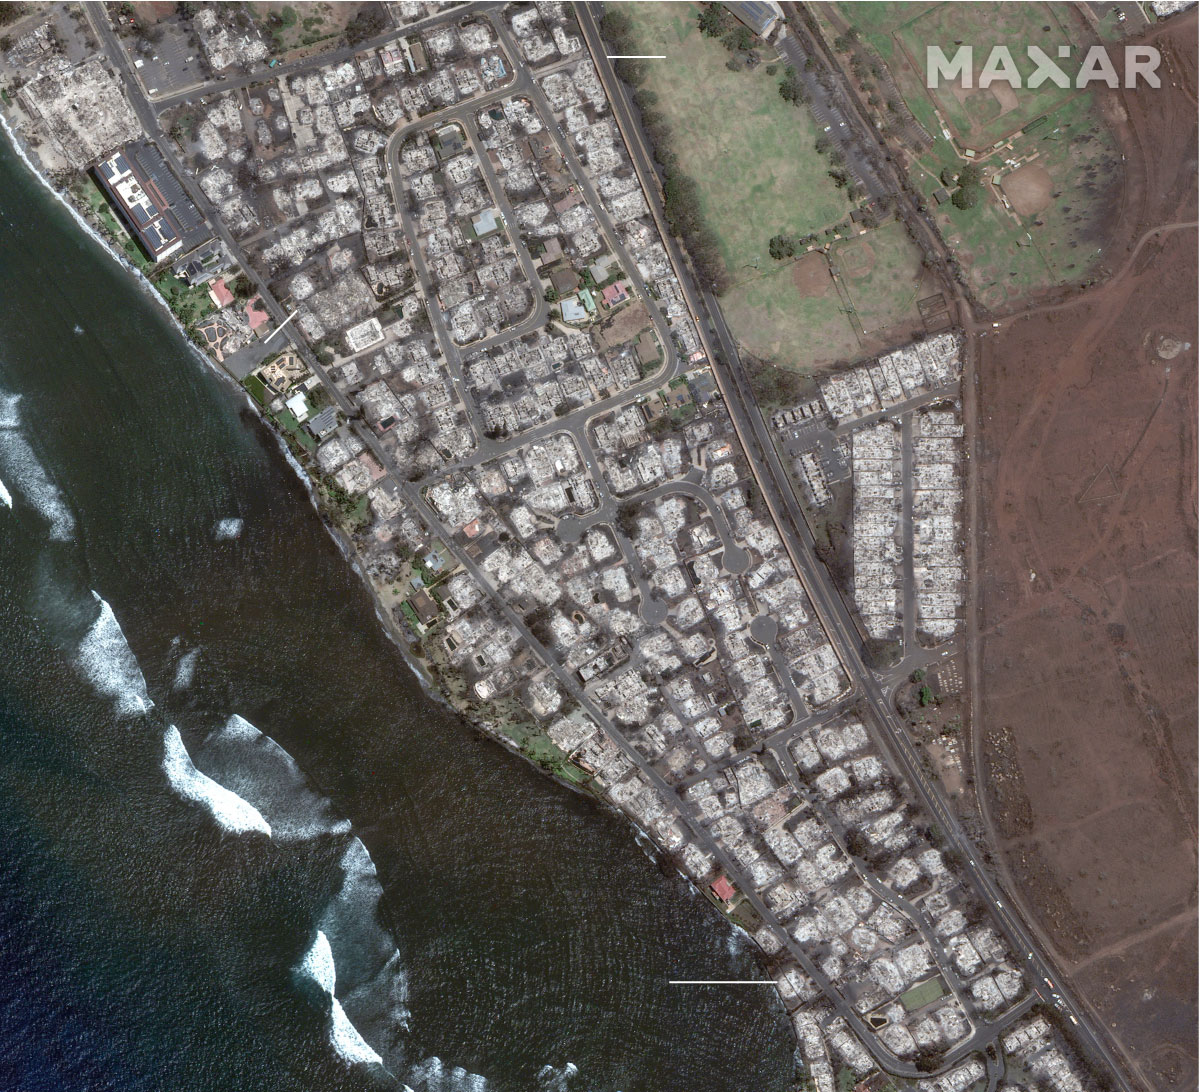 Satellite imagery shows the southern area of Lahaina on June 25 and on August 9. The two photos, side-by-side, show the burned areas, including the William K. Kaluani House and the Lucy Kaiewe Searle House.